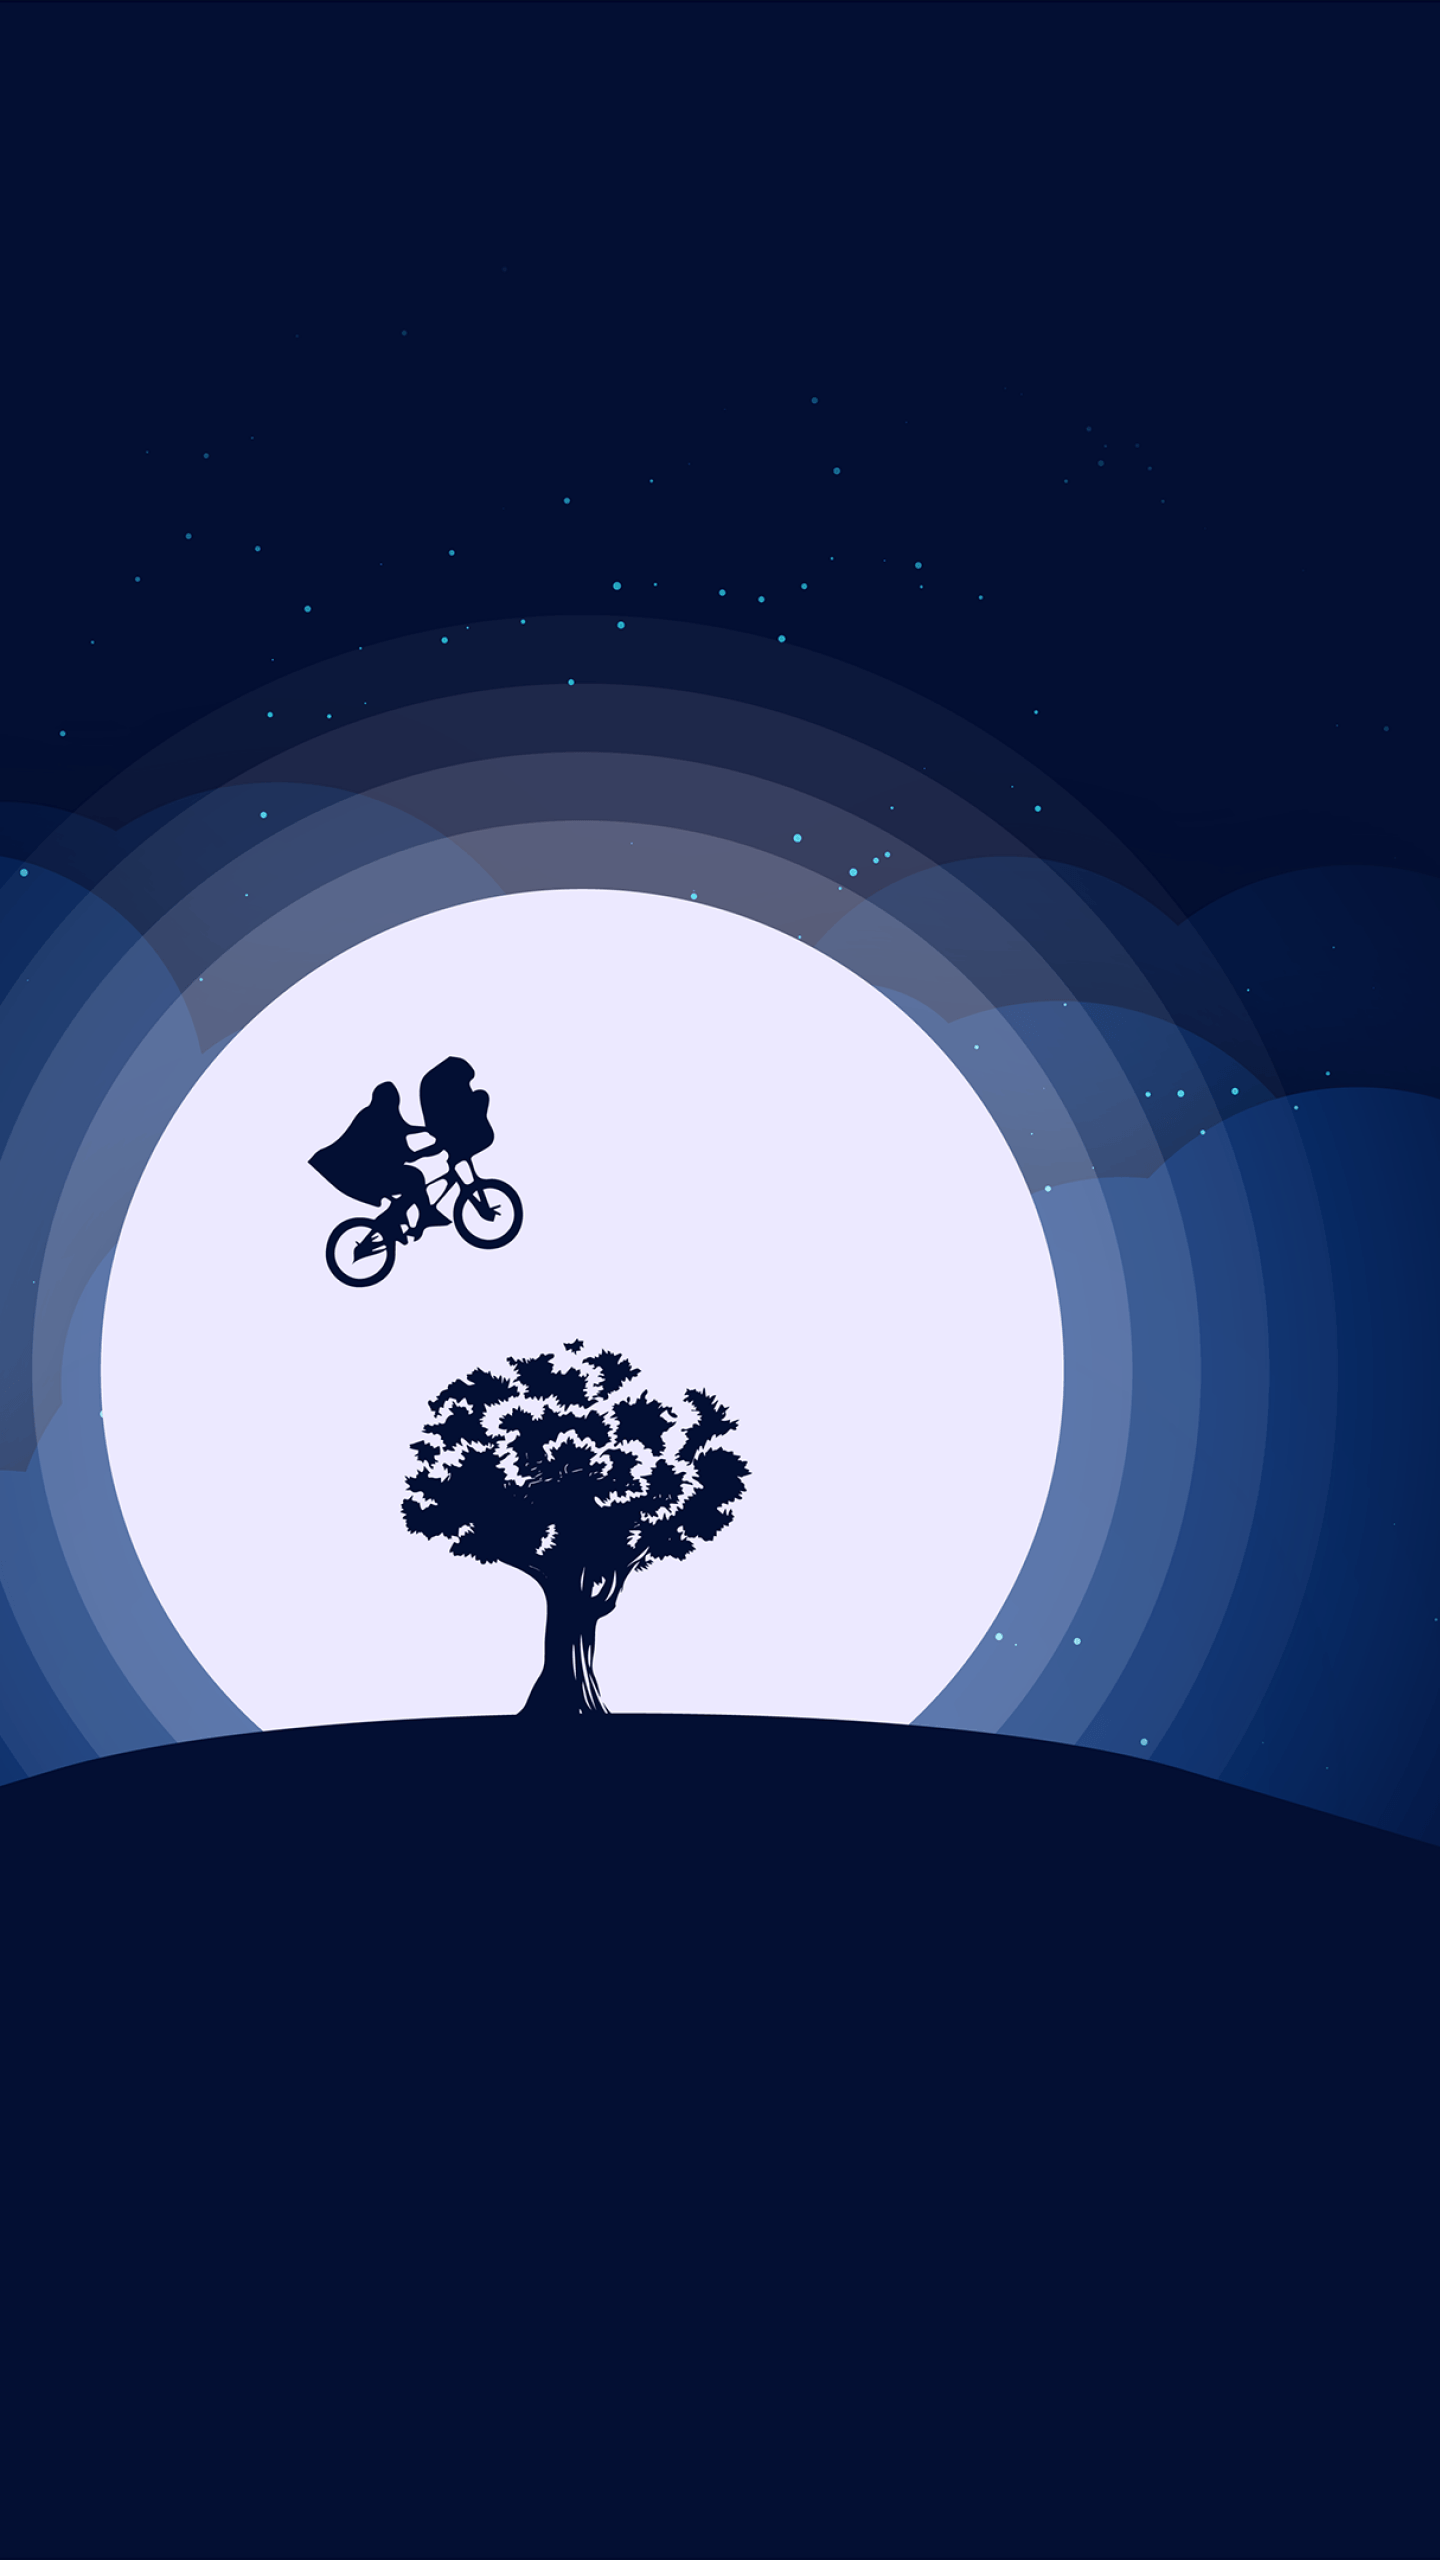 E.T. the Extra-Terrestrial for ios instal free